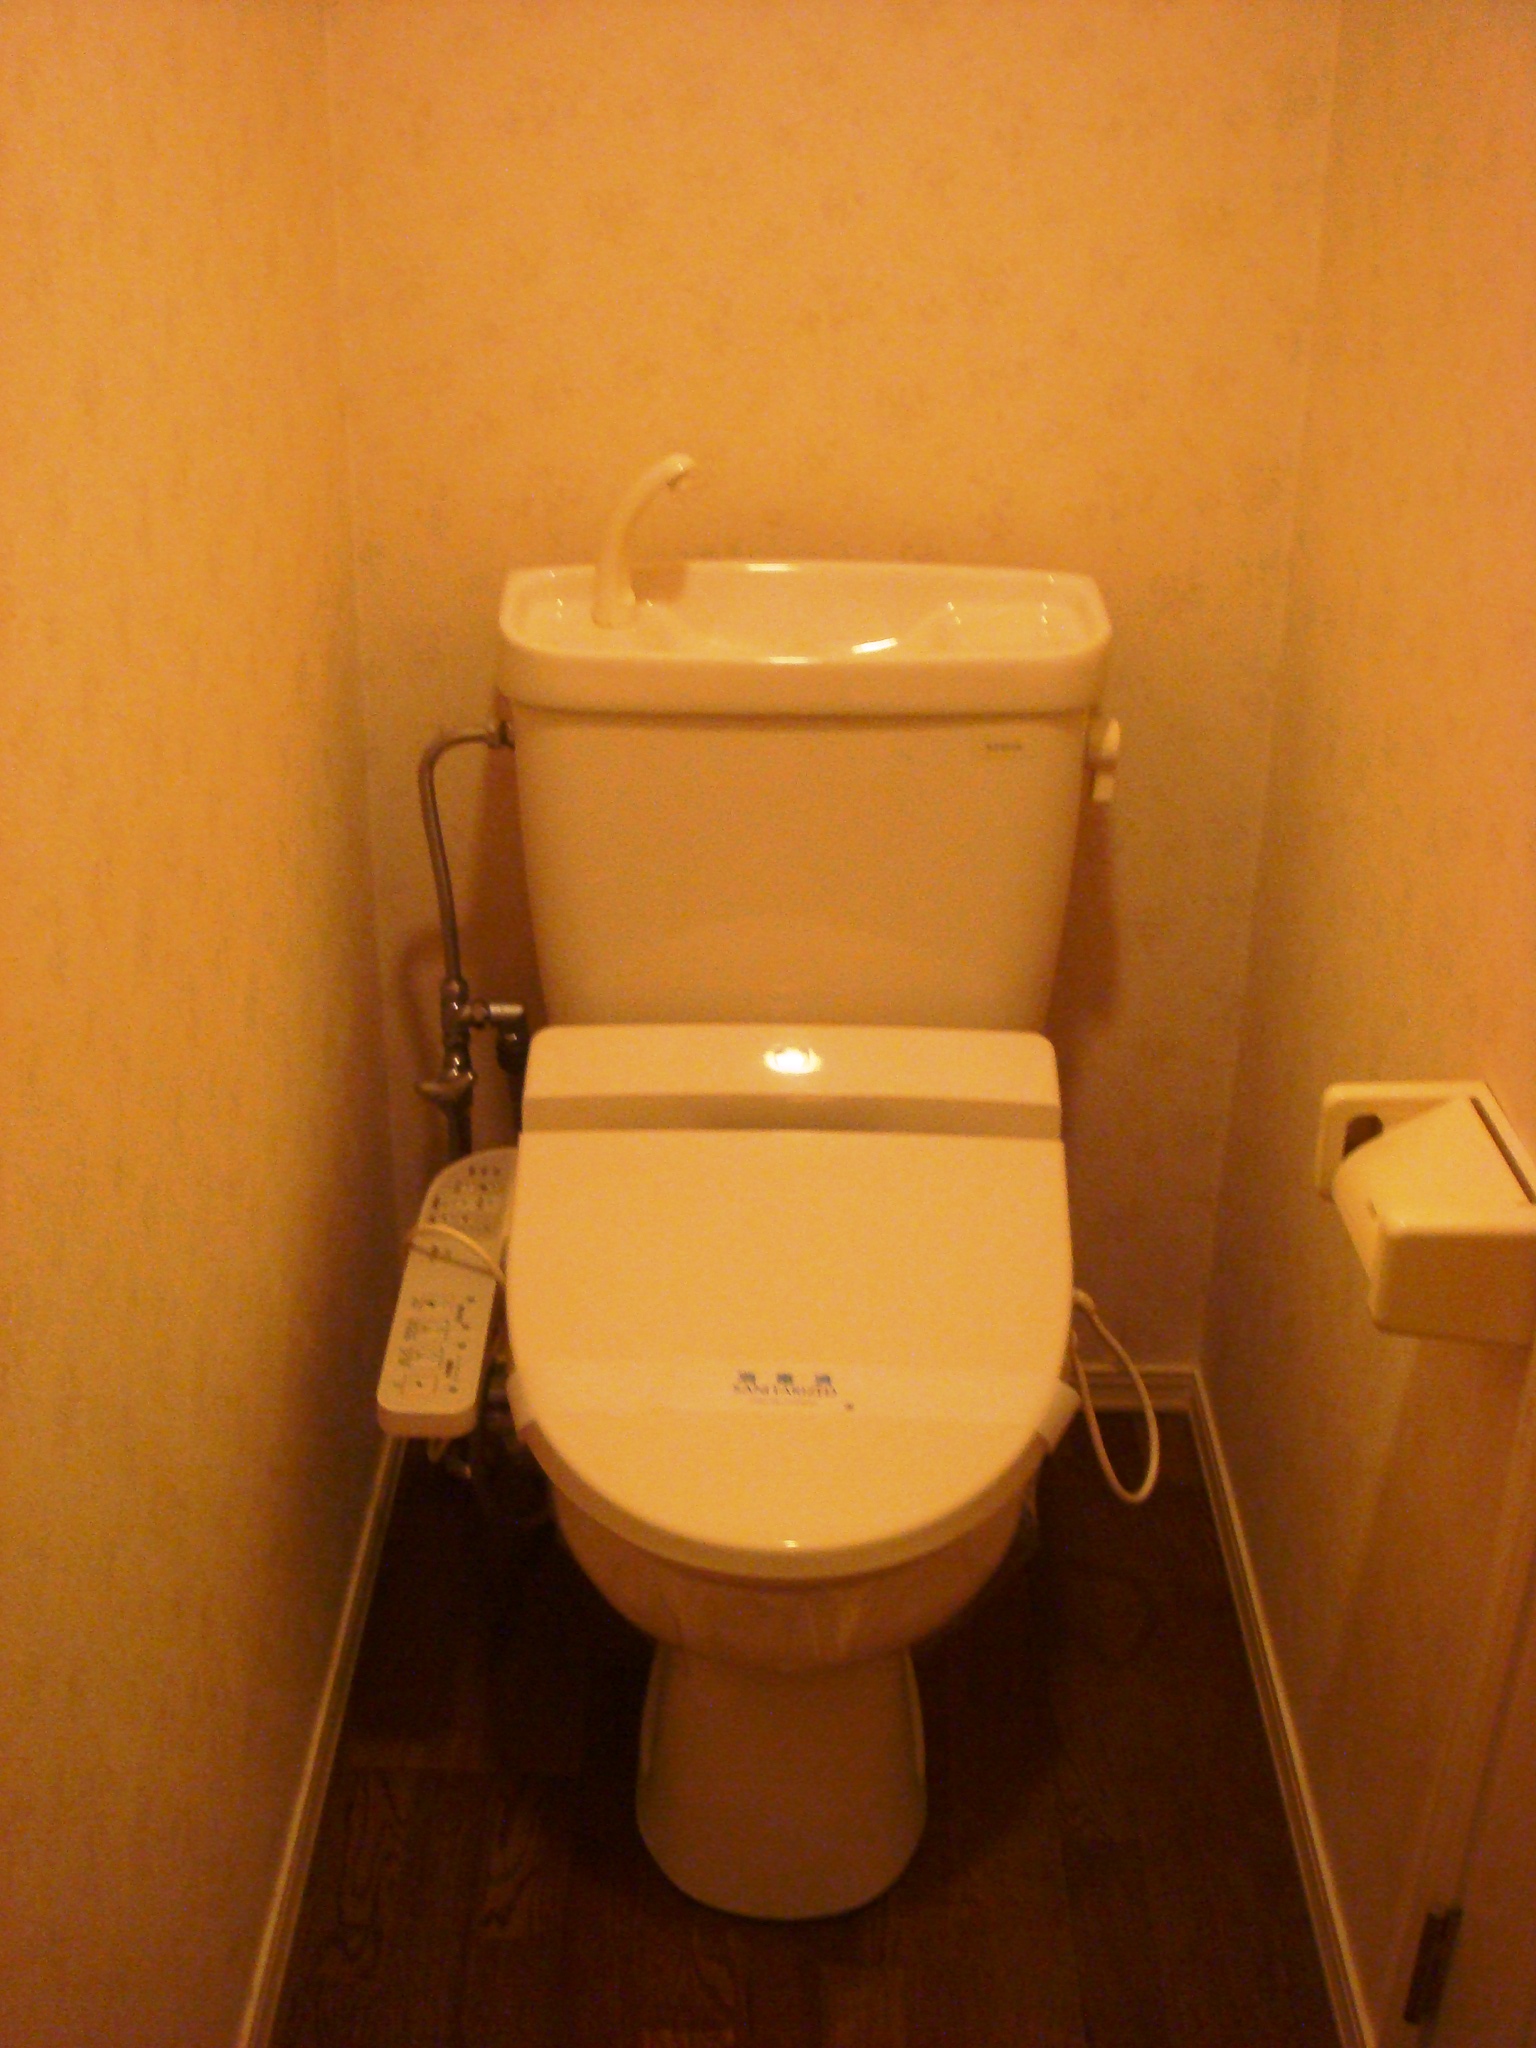 Toilet. Washlet is with